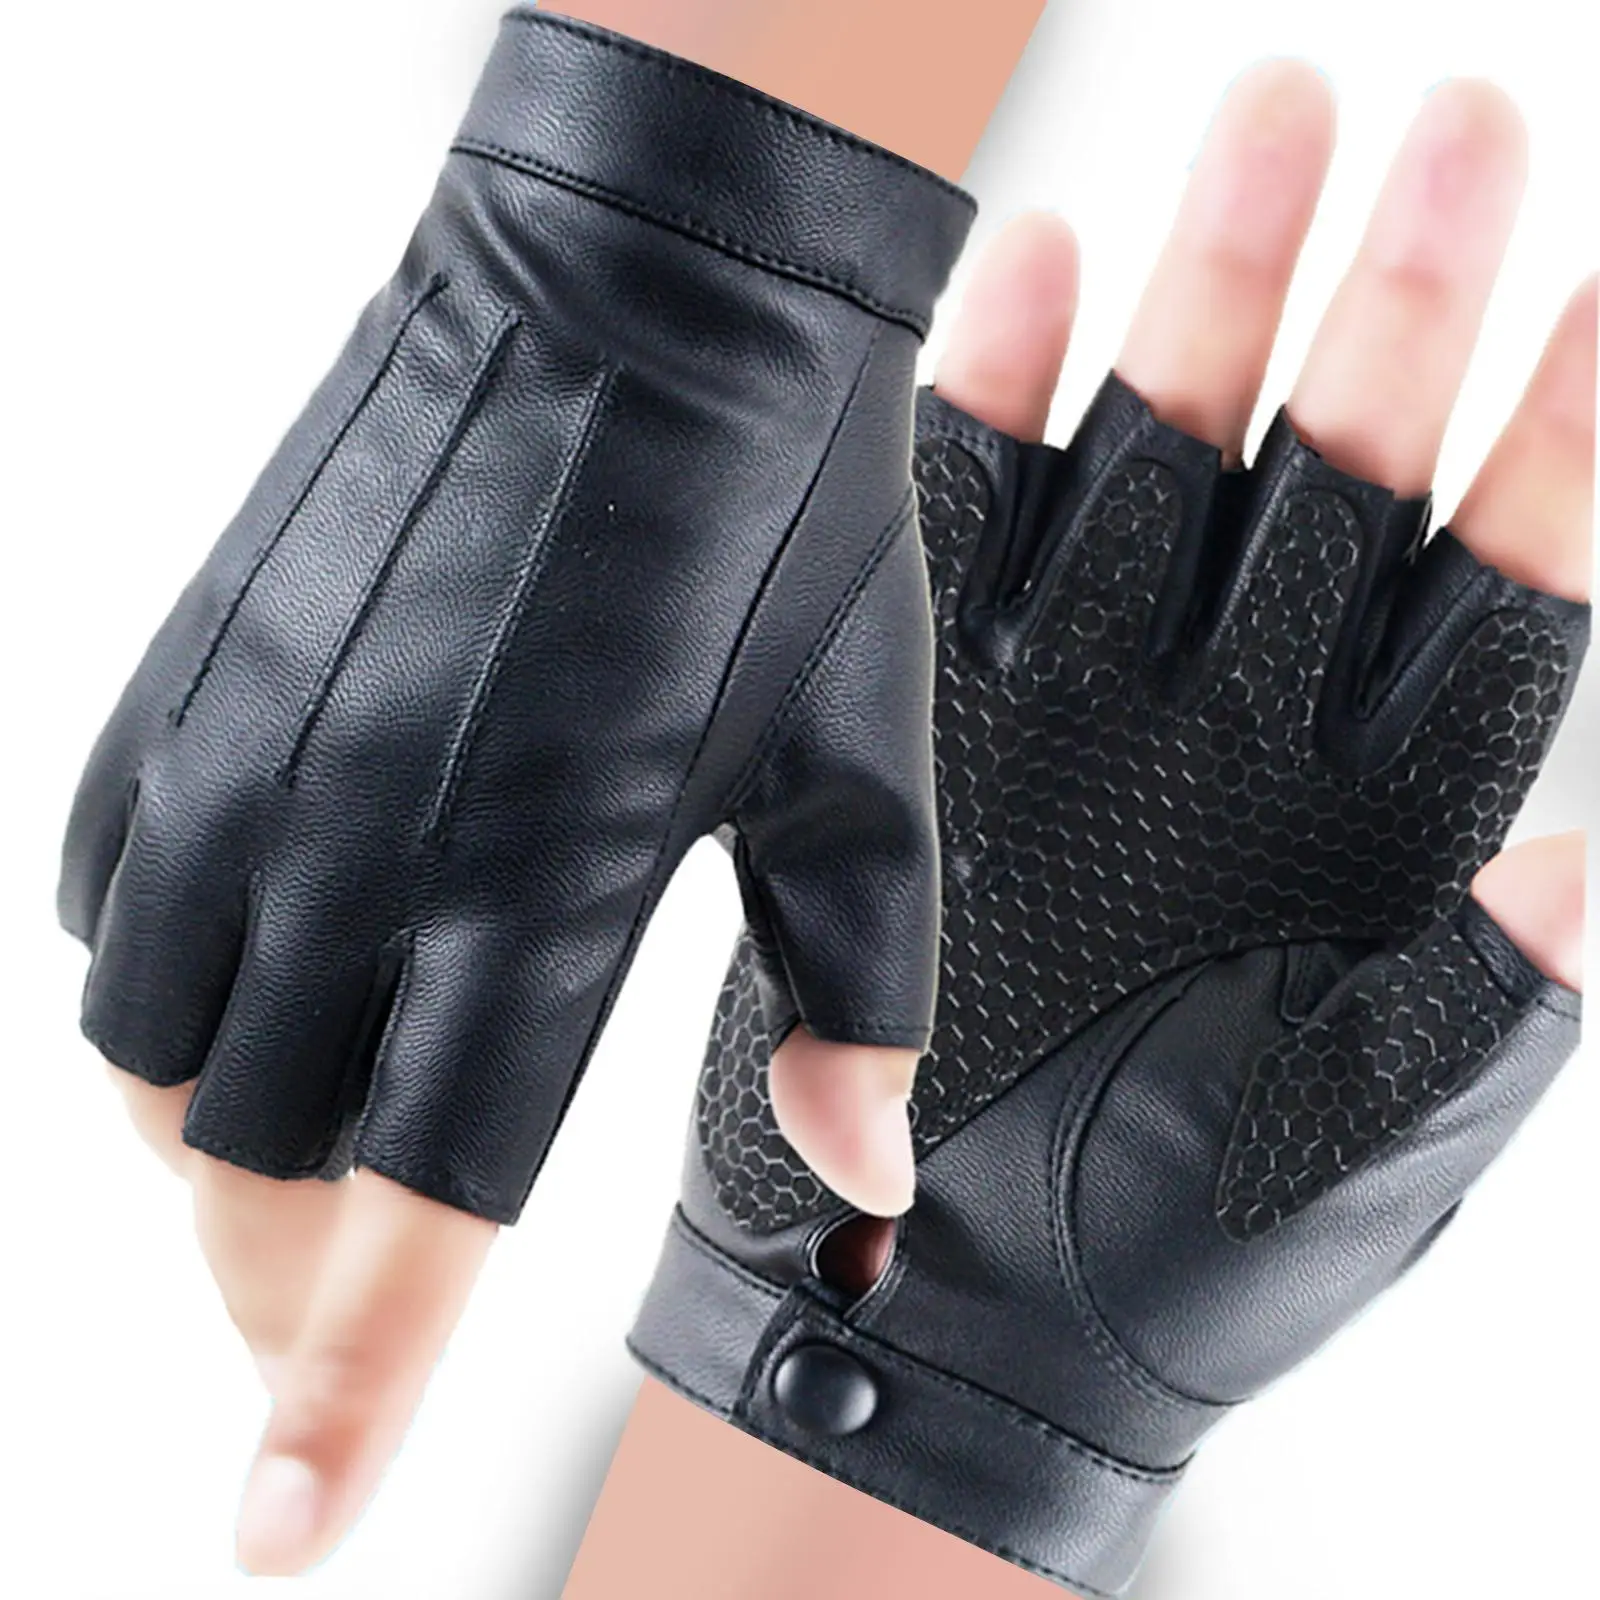 Breathable PU Leather Gloves Non Slip Palm Protection Lightweight Half Finger Gloves for Driving Running Hiking Cycling Riding